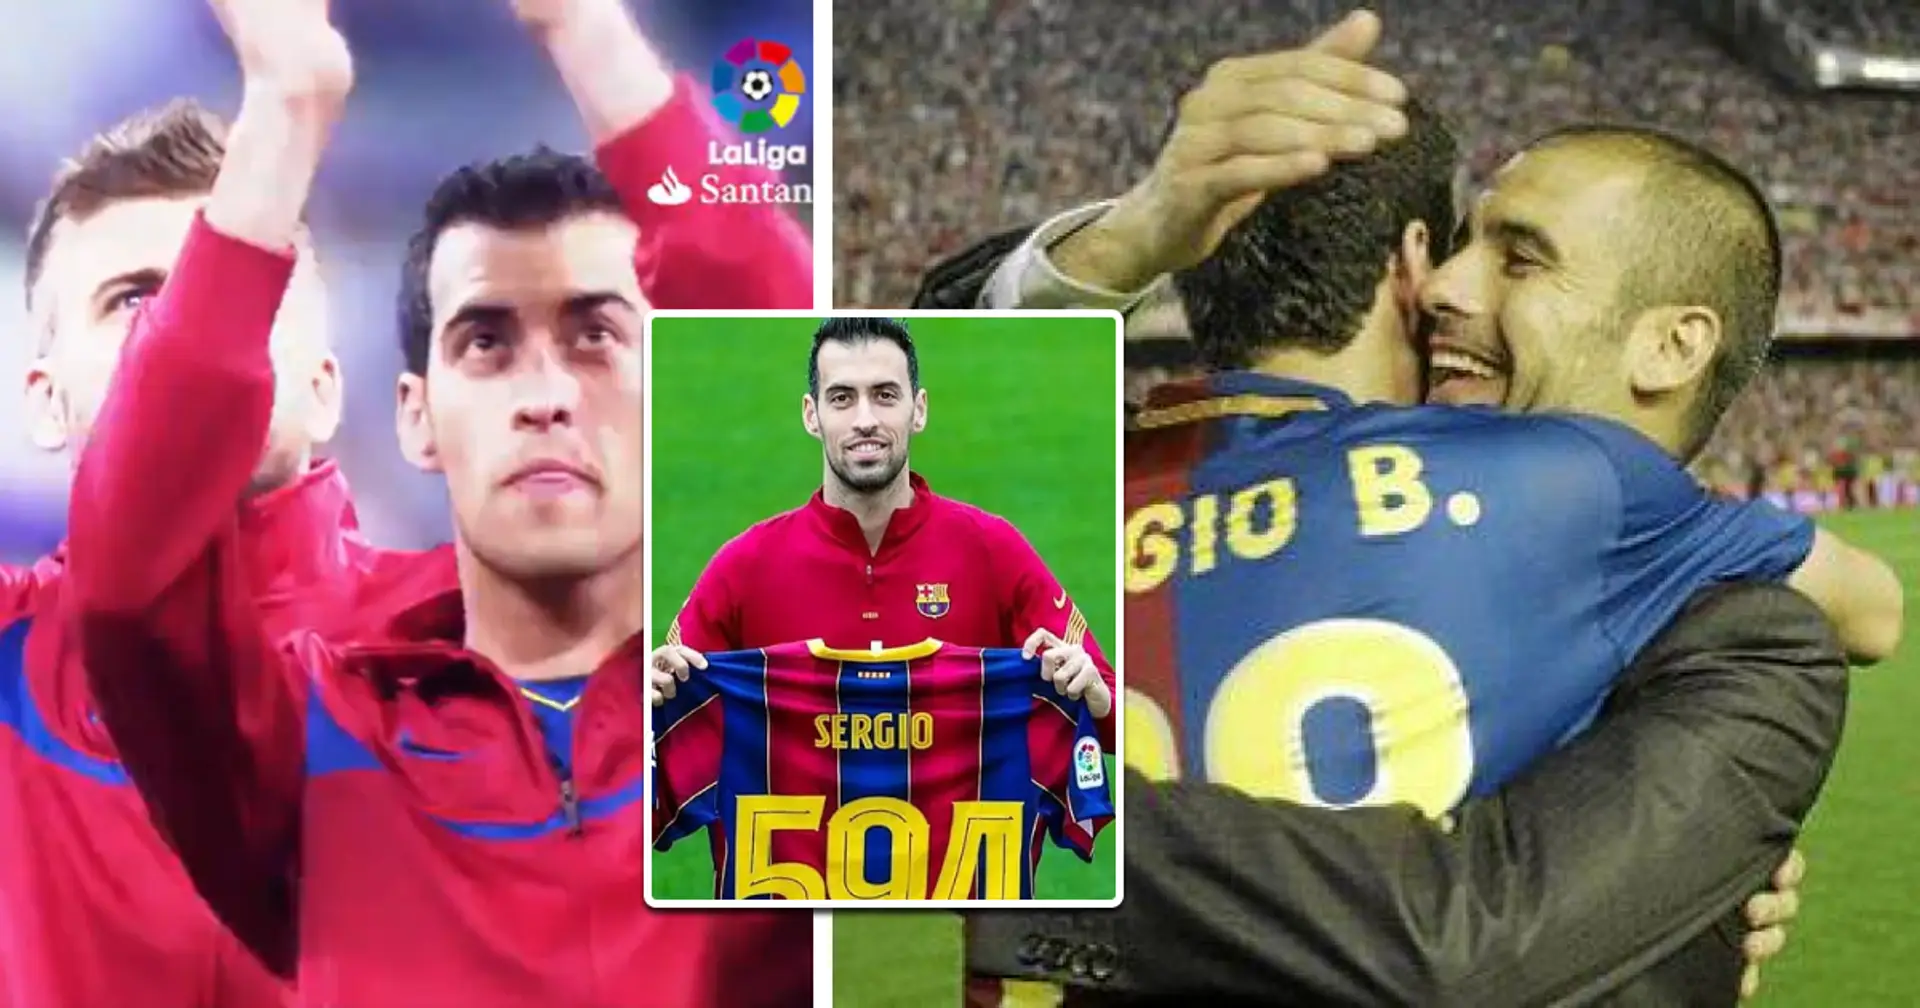 Recalling the most iconic phrase about Sergio Busquets and who said it - not Pep